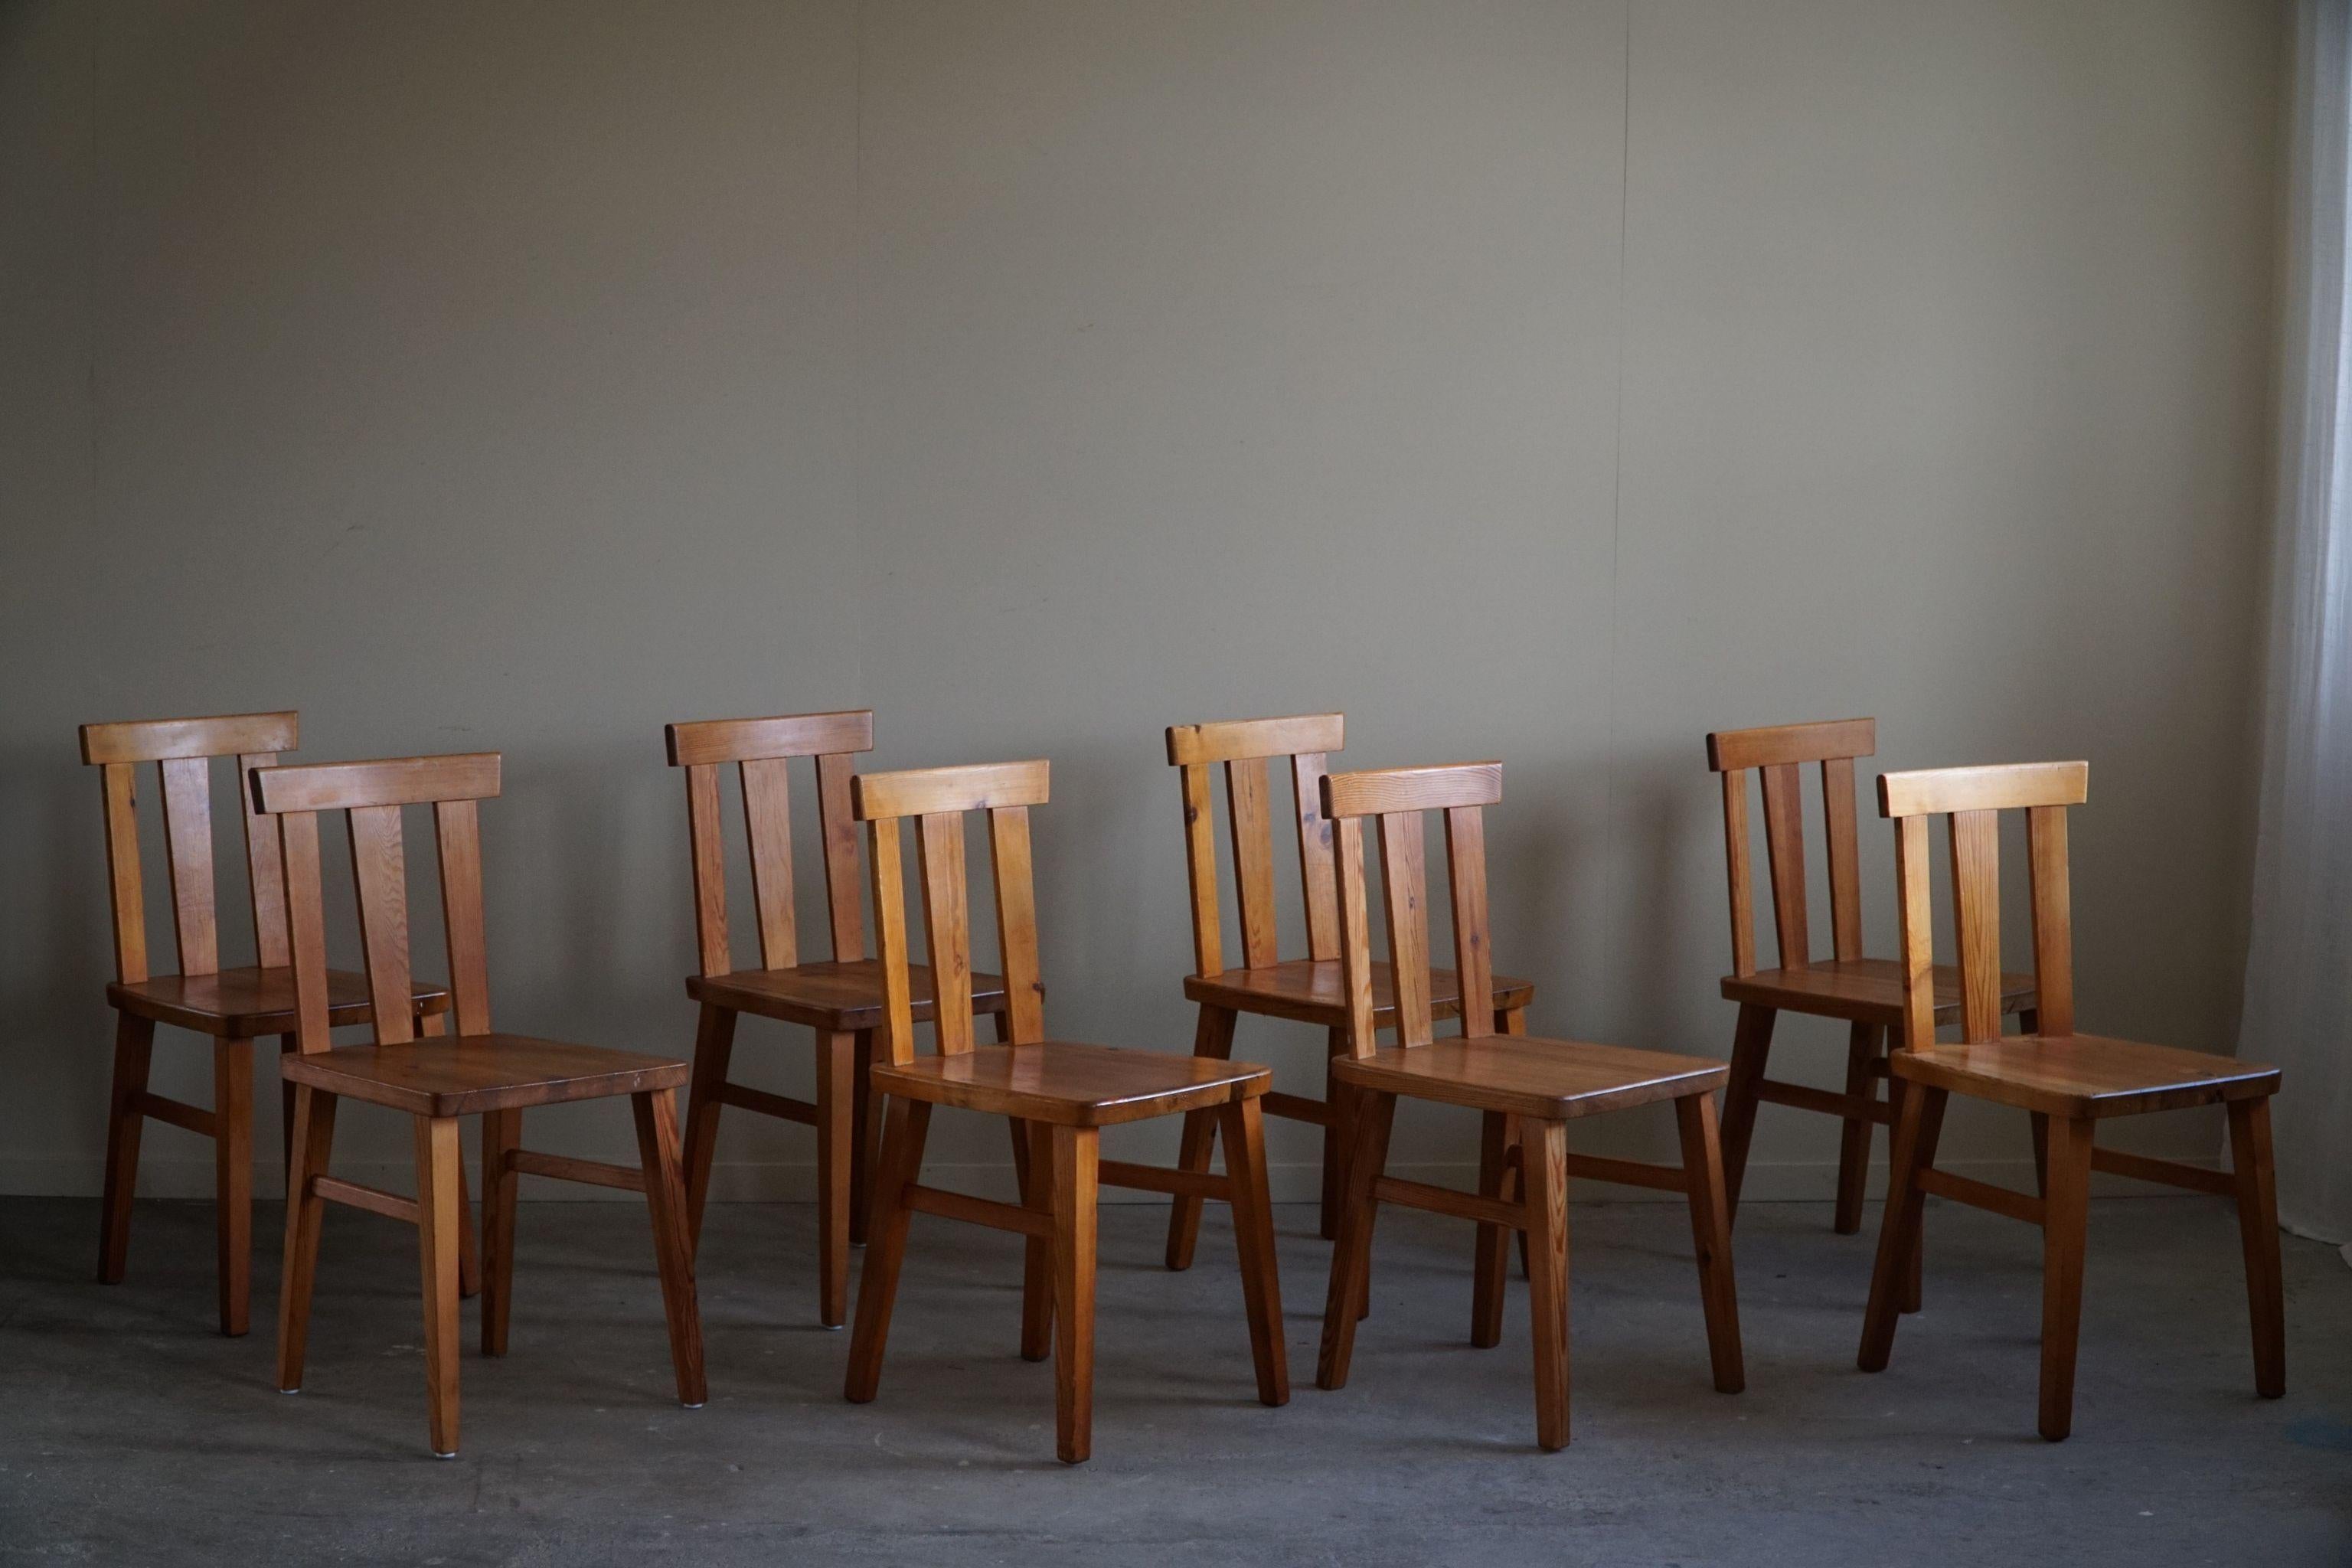 Swedish Modern, Set of 8 Chairs in Solid Pine, Axel Einar Hjorth Style, 1950s In Fair Condition For Sale In Odense, DK